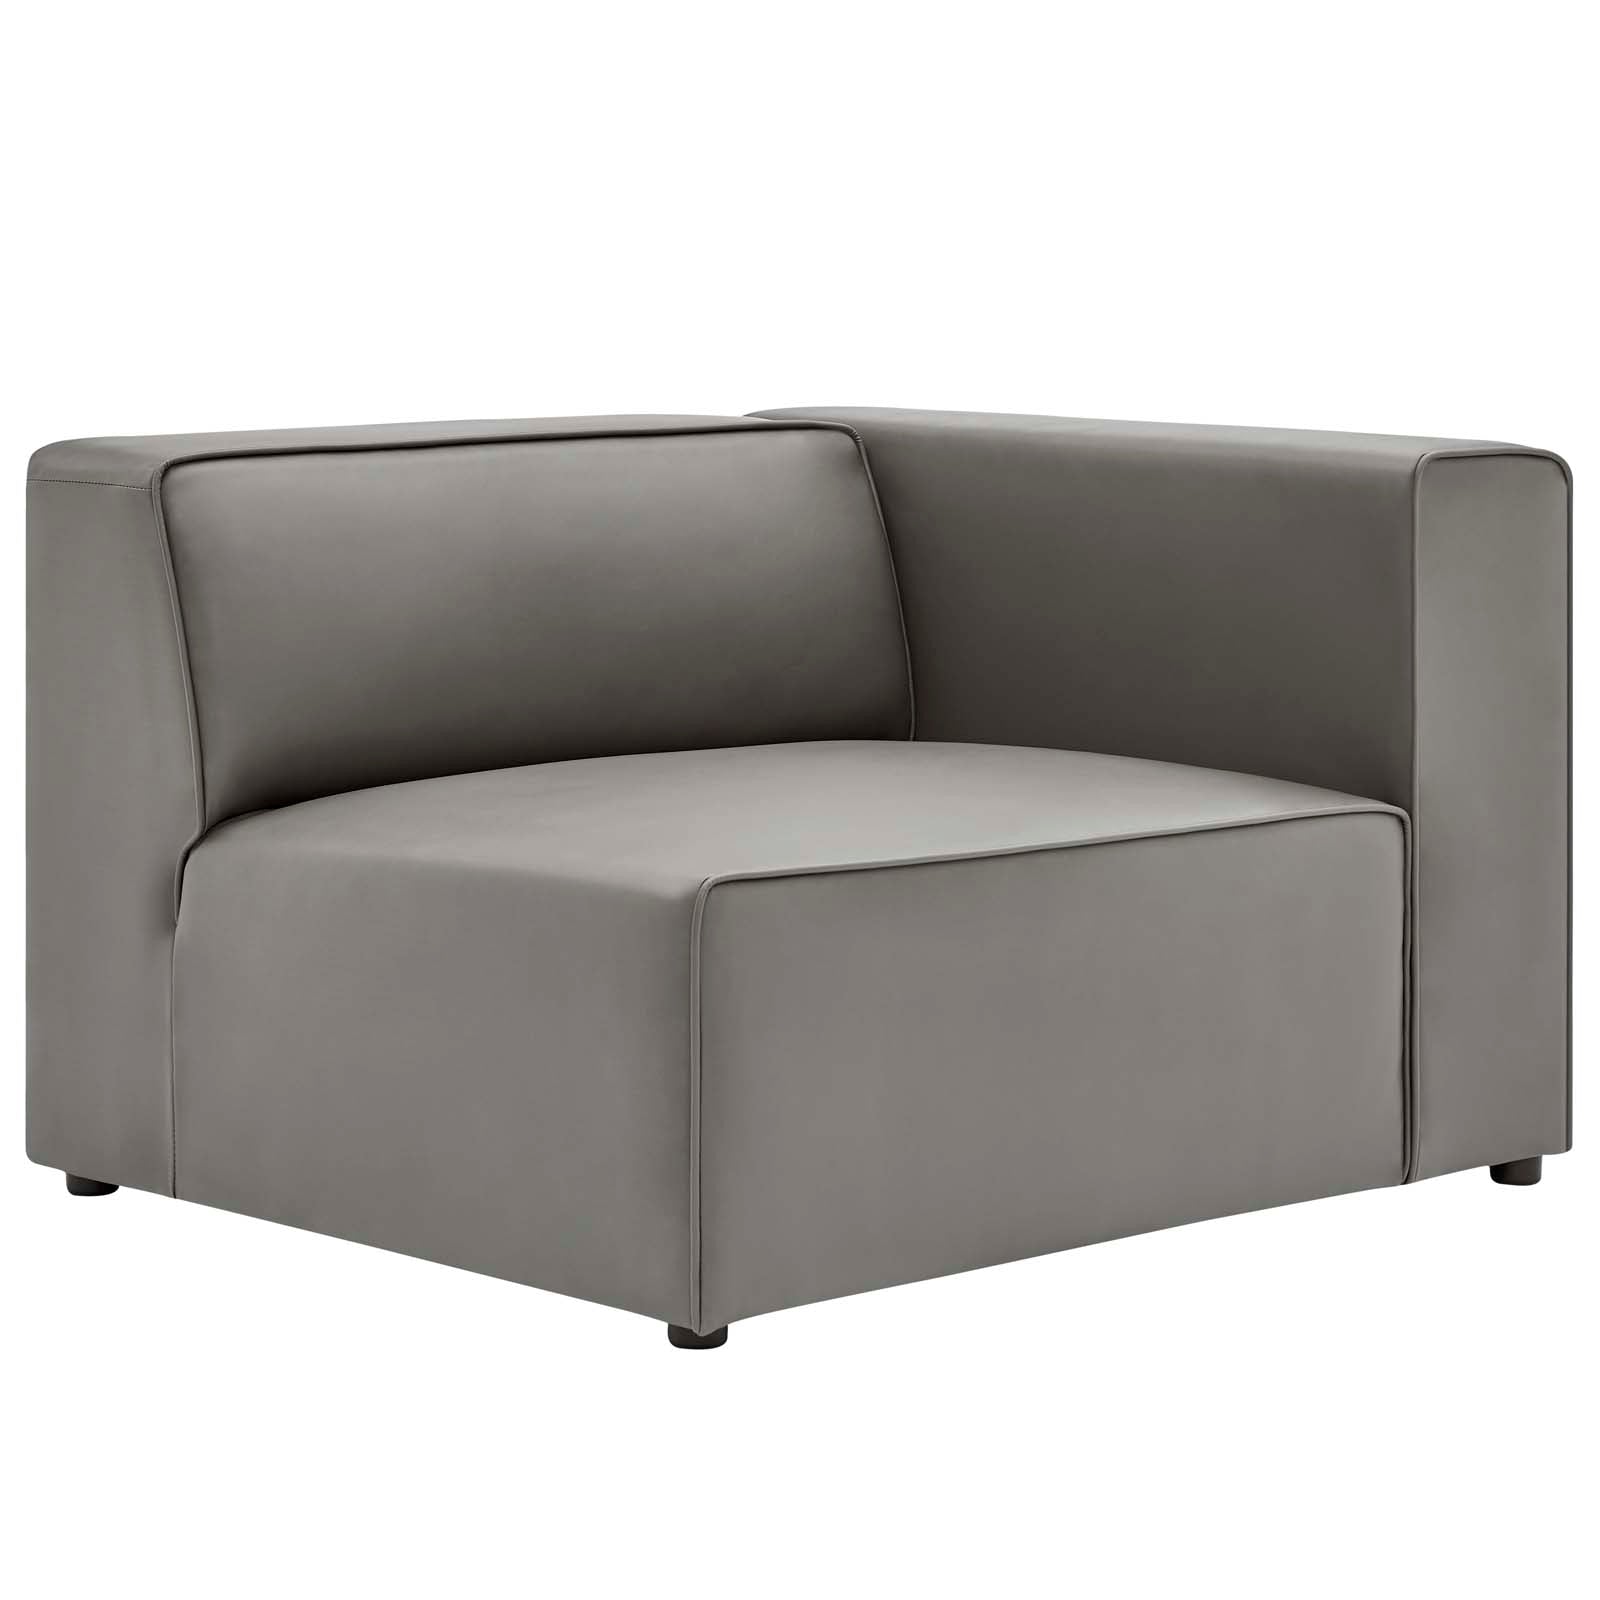 Modway Sectional Sofas - Mingle Vegan Leather 2-Piece Sectional Sofa Loveseat Gray